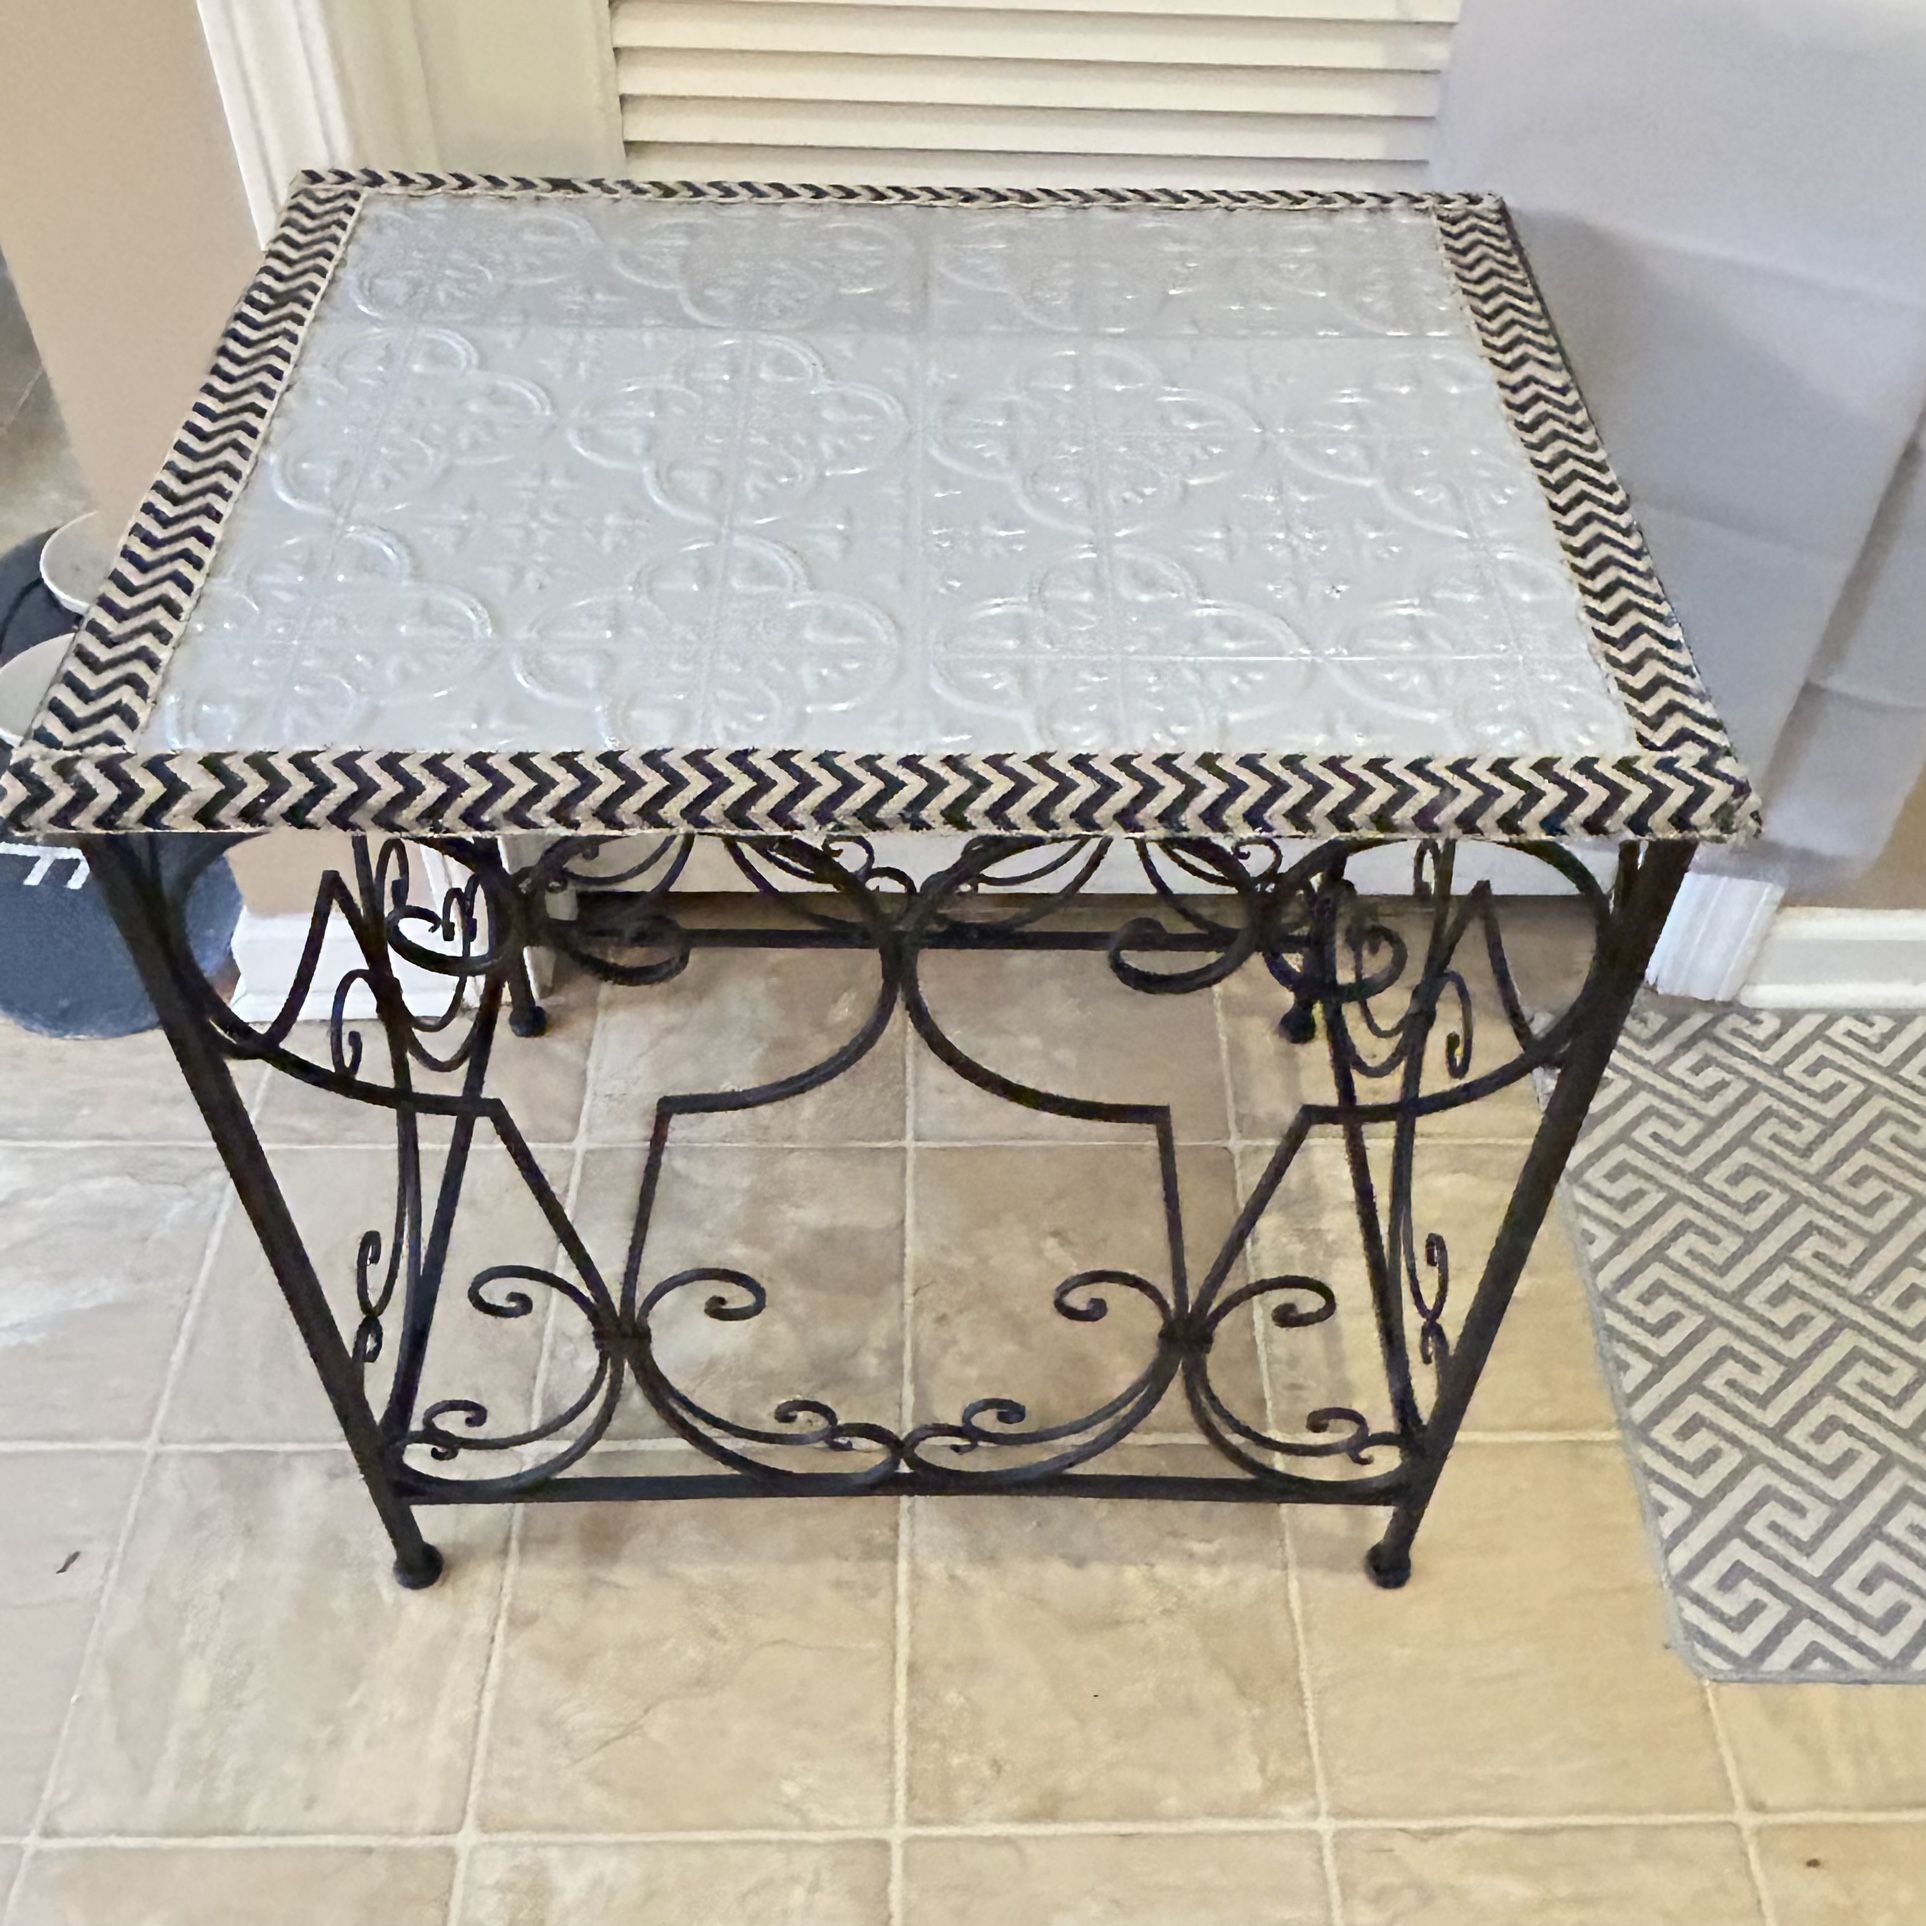 $10 Up Cycled Accent Table